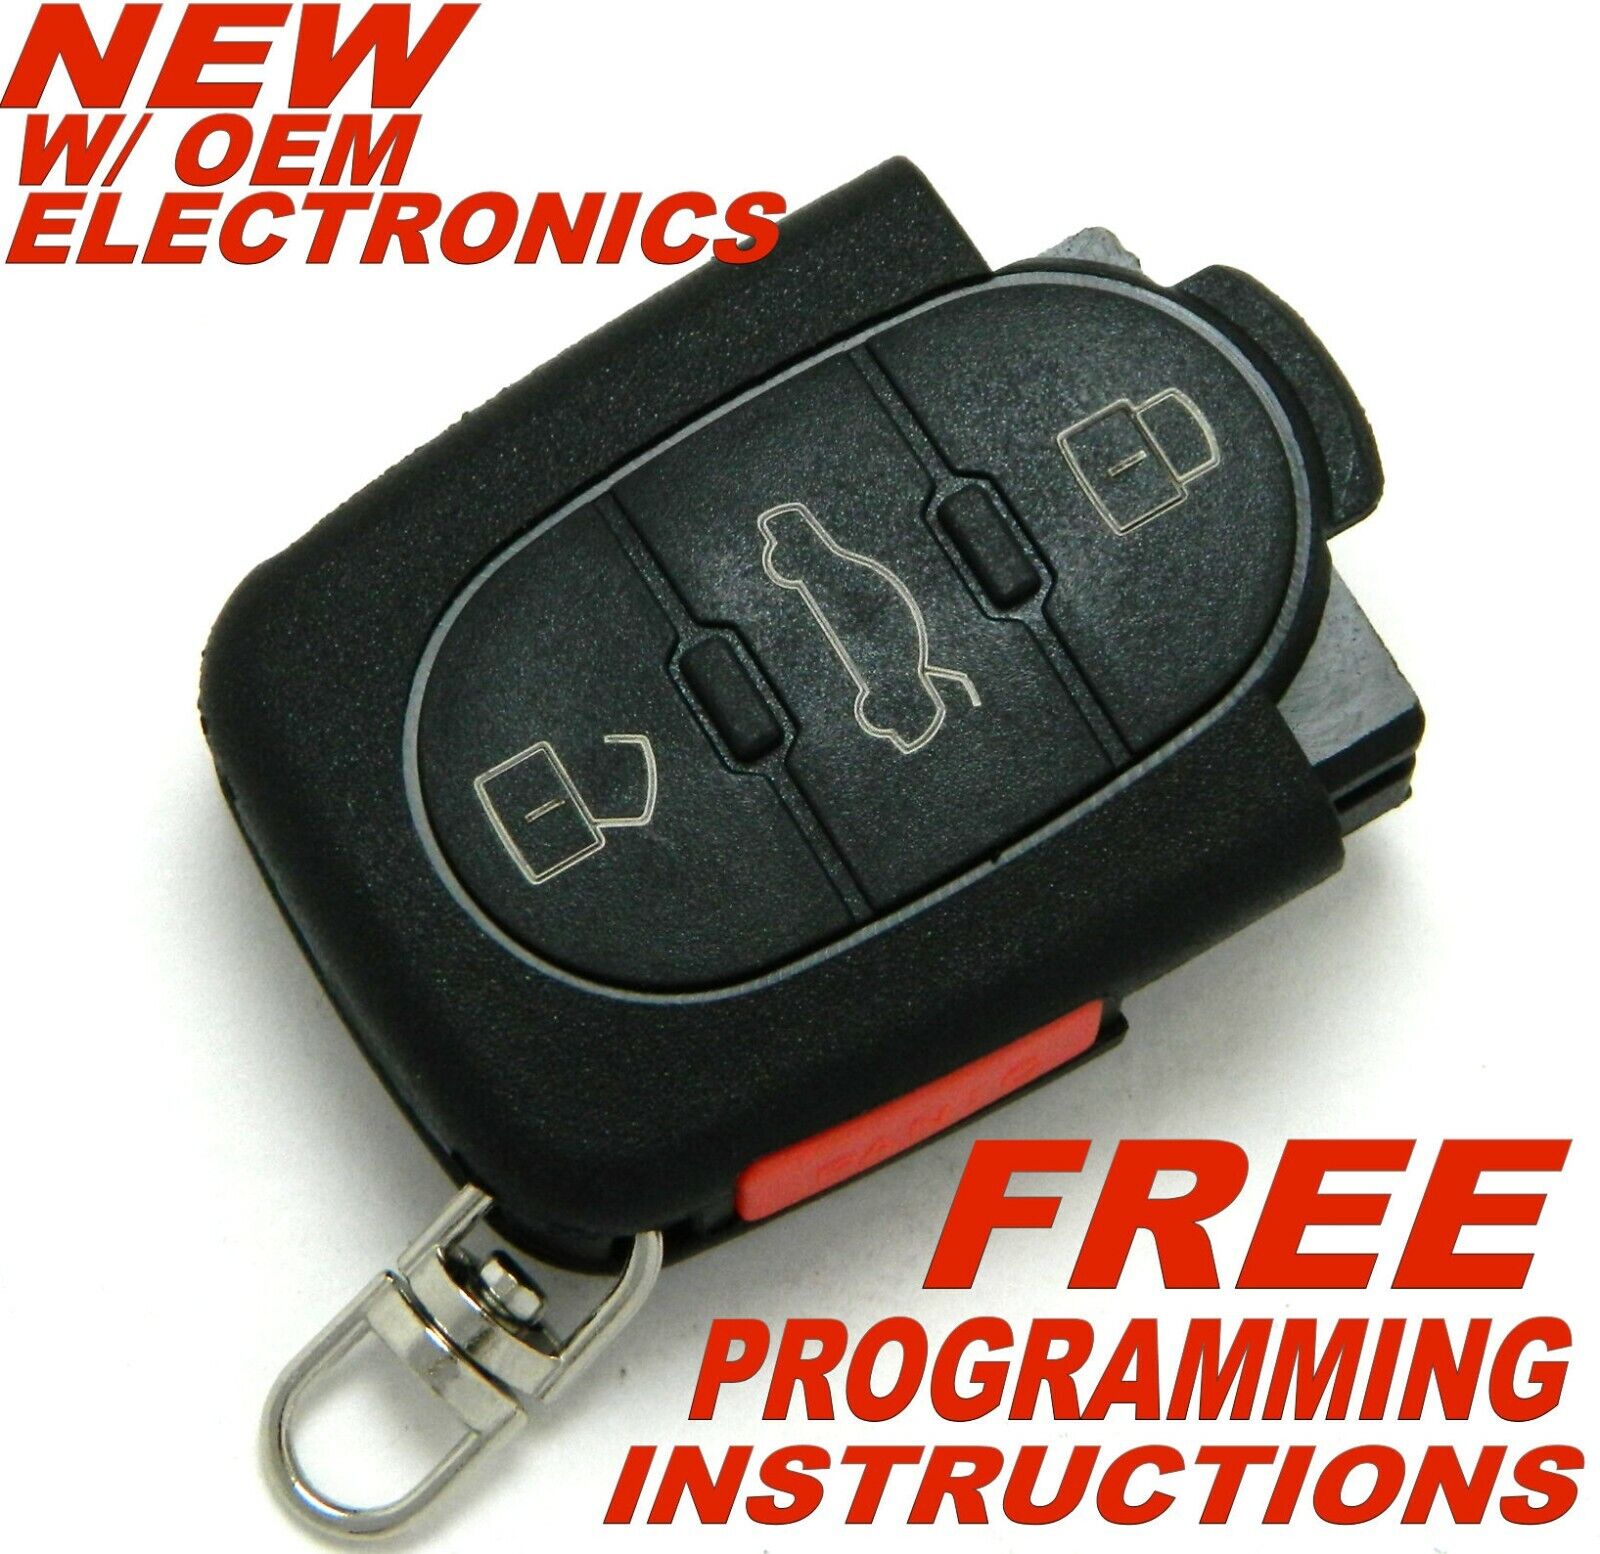 OEM ELECTRONIC REMOTE KEY FOB KEYLESS ENTRY FOR 1998-2001 VOLKSWAGEN BEETLE 